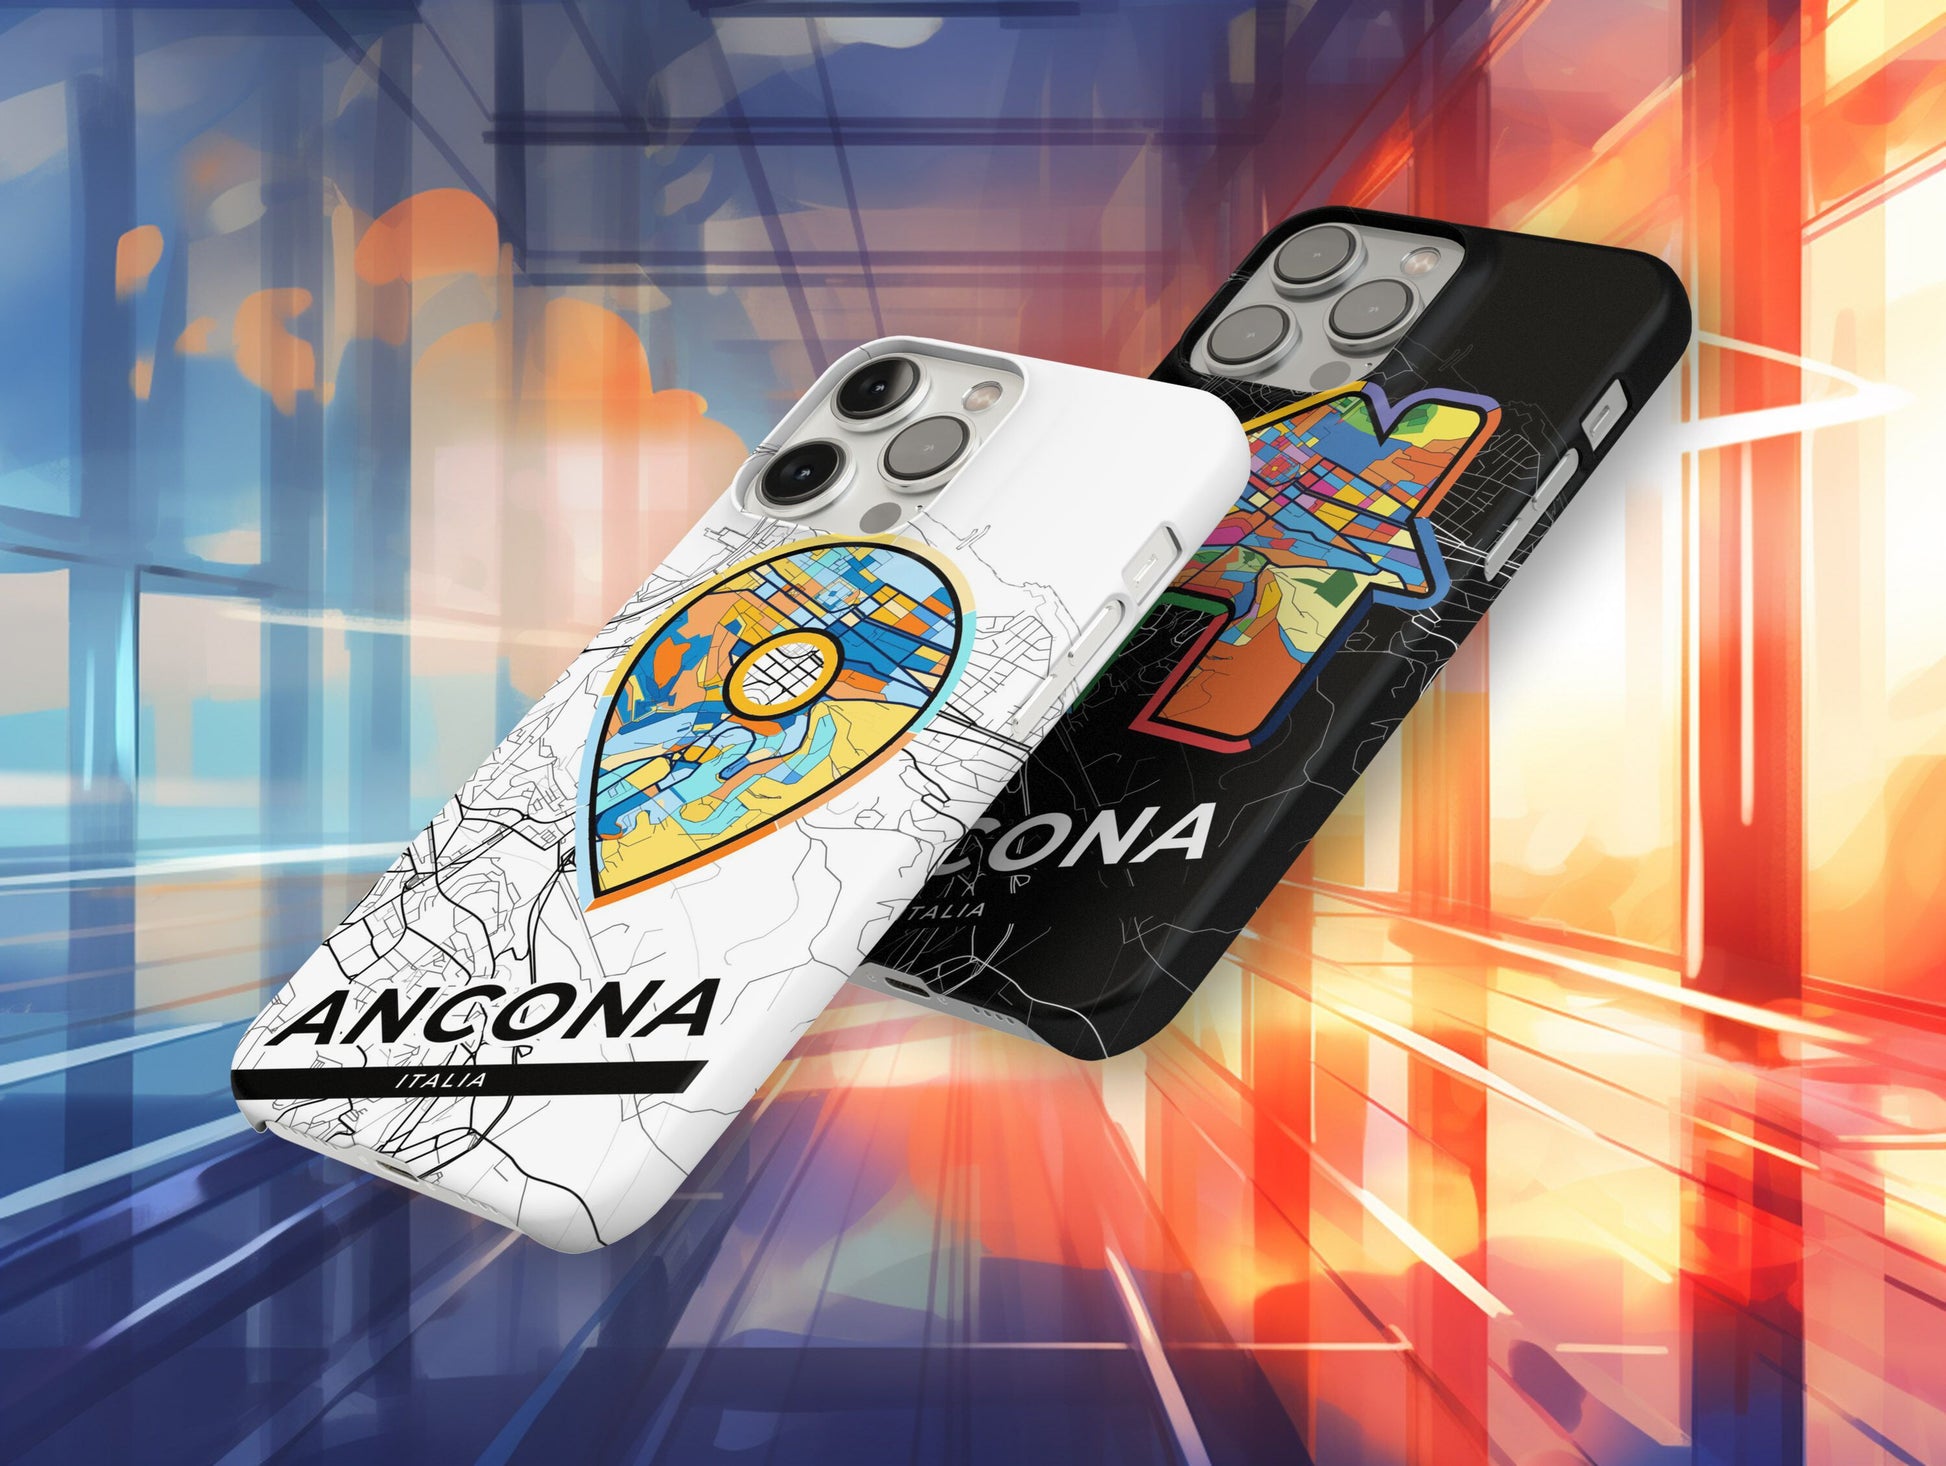 Ancona Italy slim phone case with colorful icon. Birthday, wedding or housewarming gift. Couple match cases.